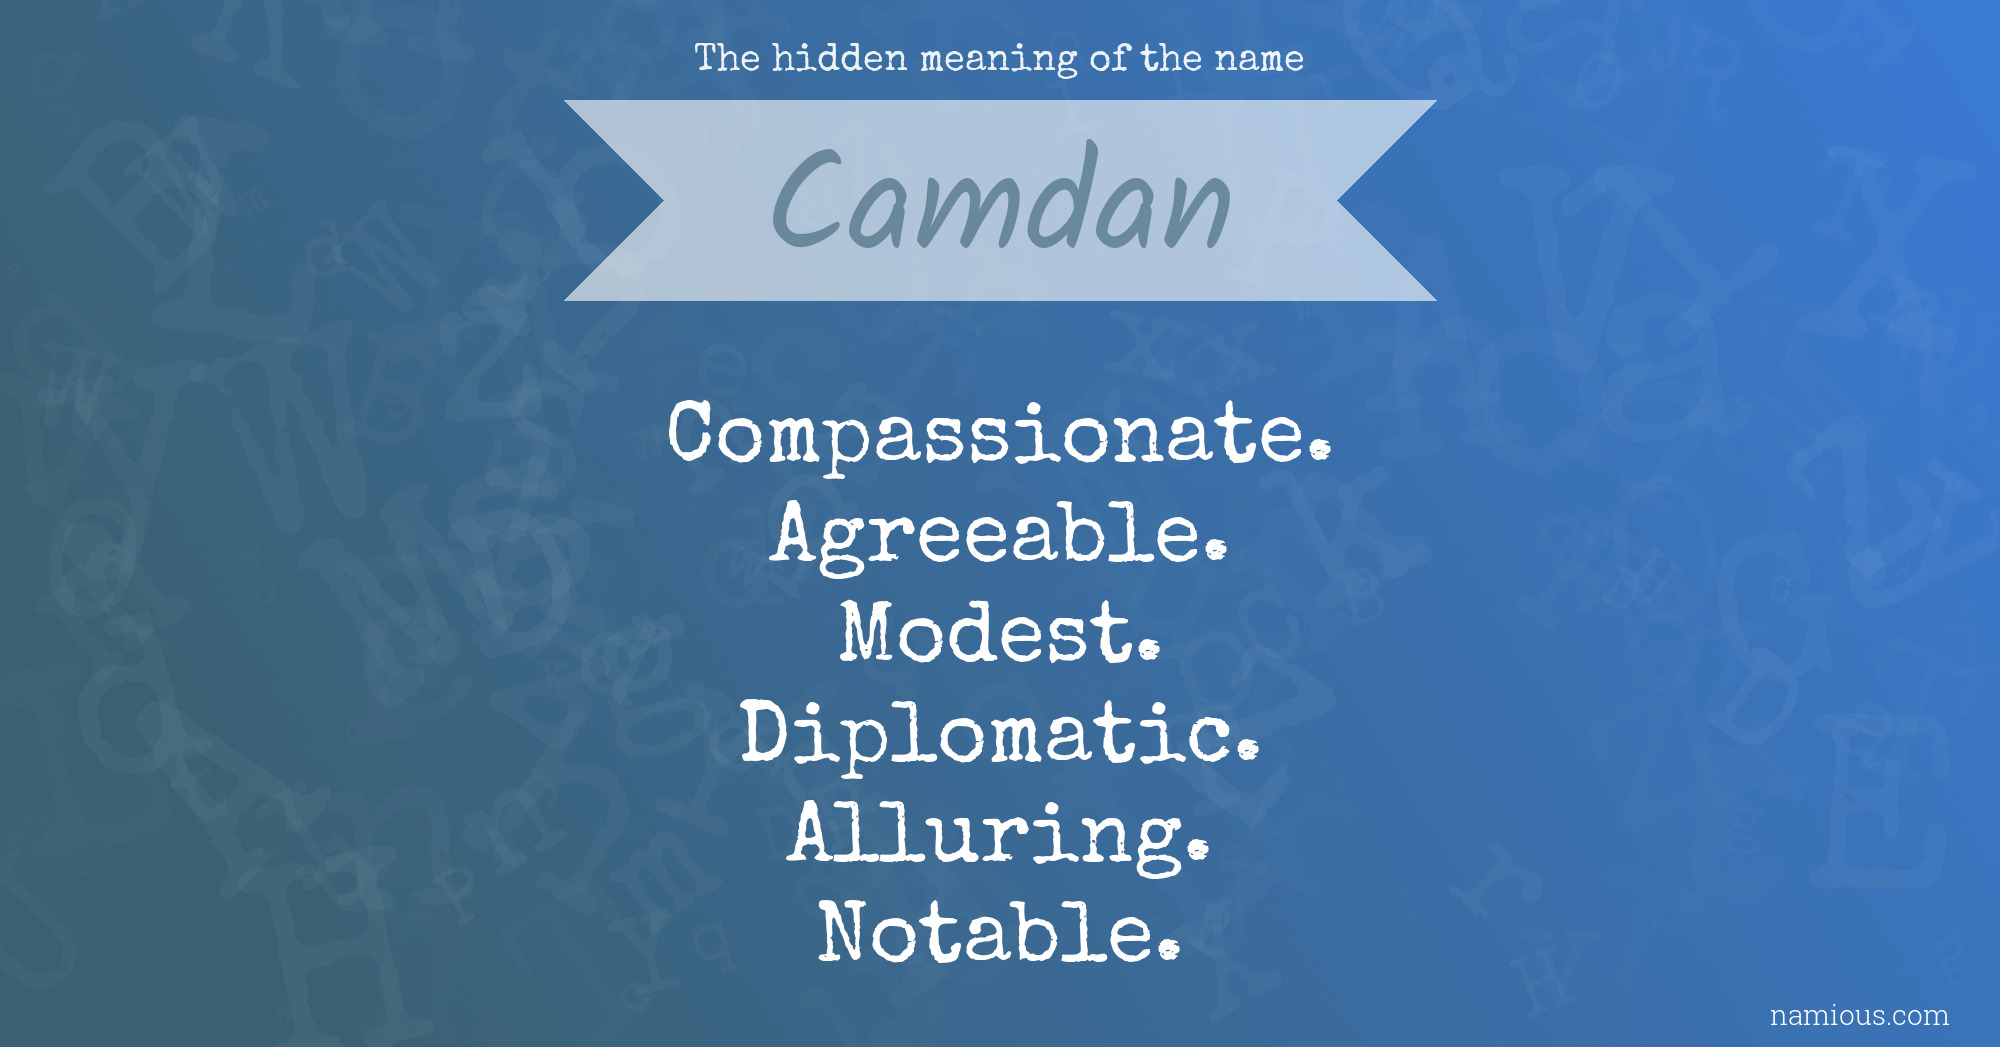 The hidden meaning of the name Camdan